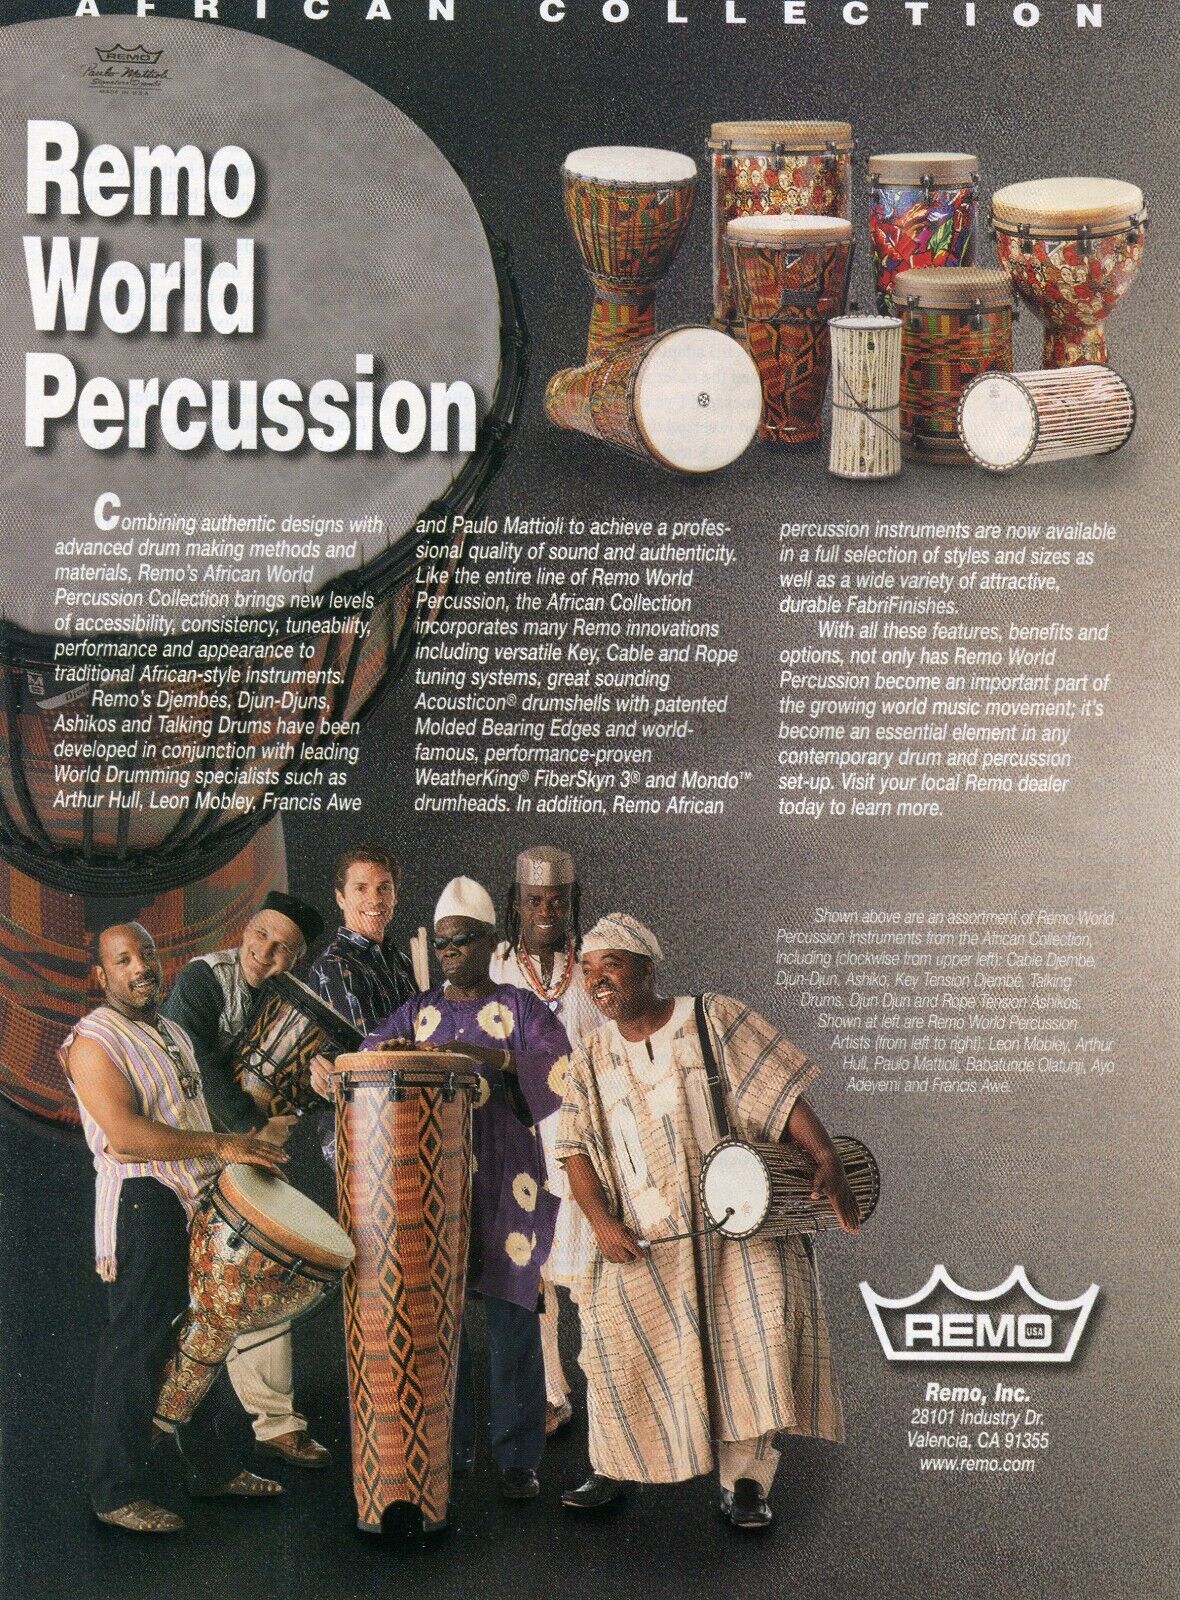 1999 Print Ad of Remo World Percussion w Leon Mobley, Arthur Hull, Francis Awe